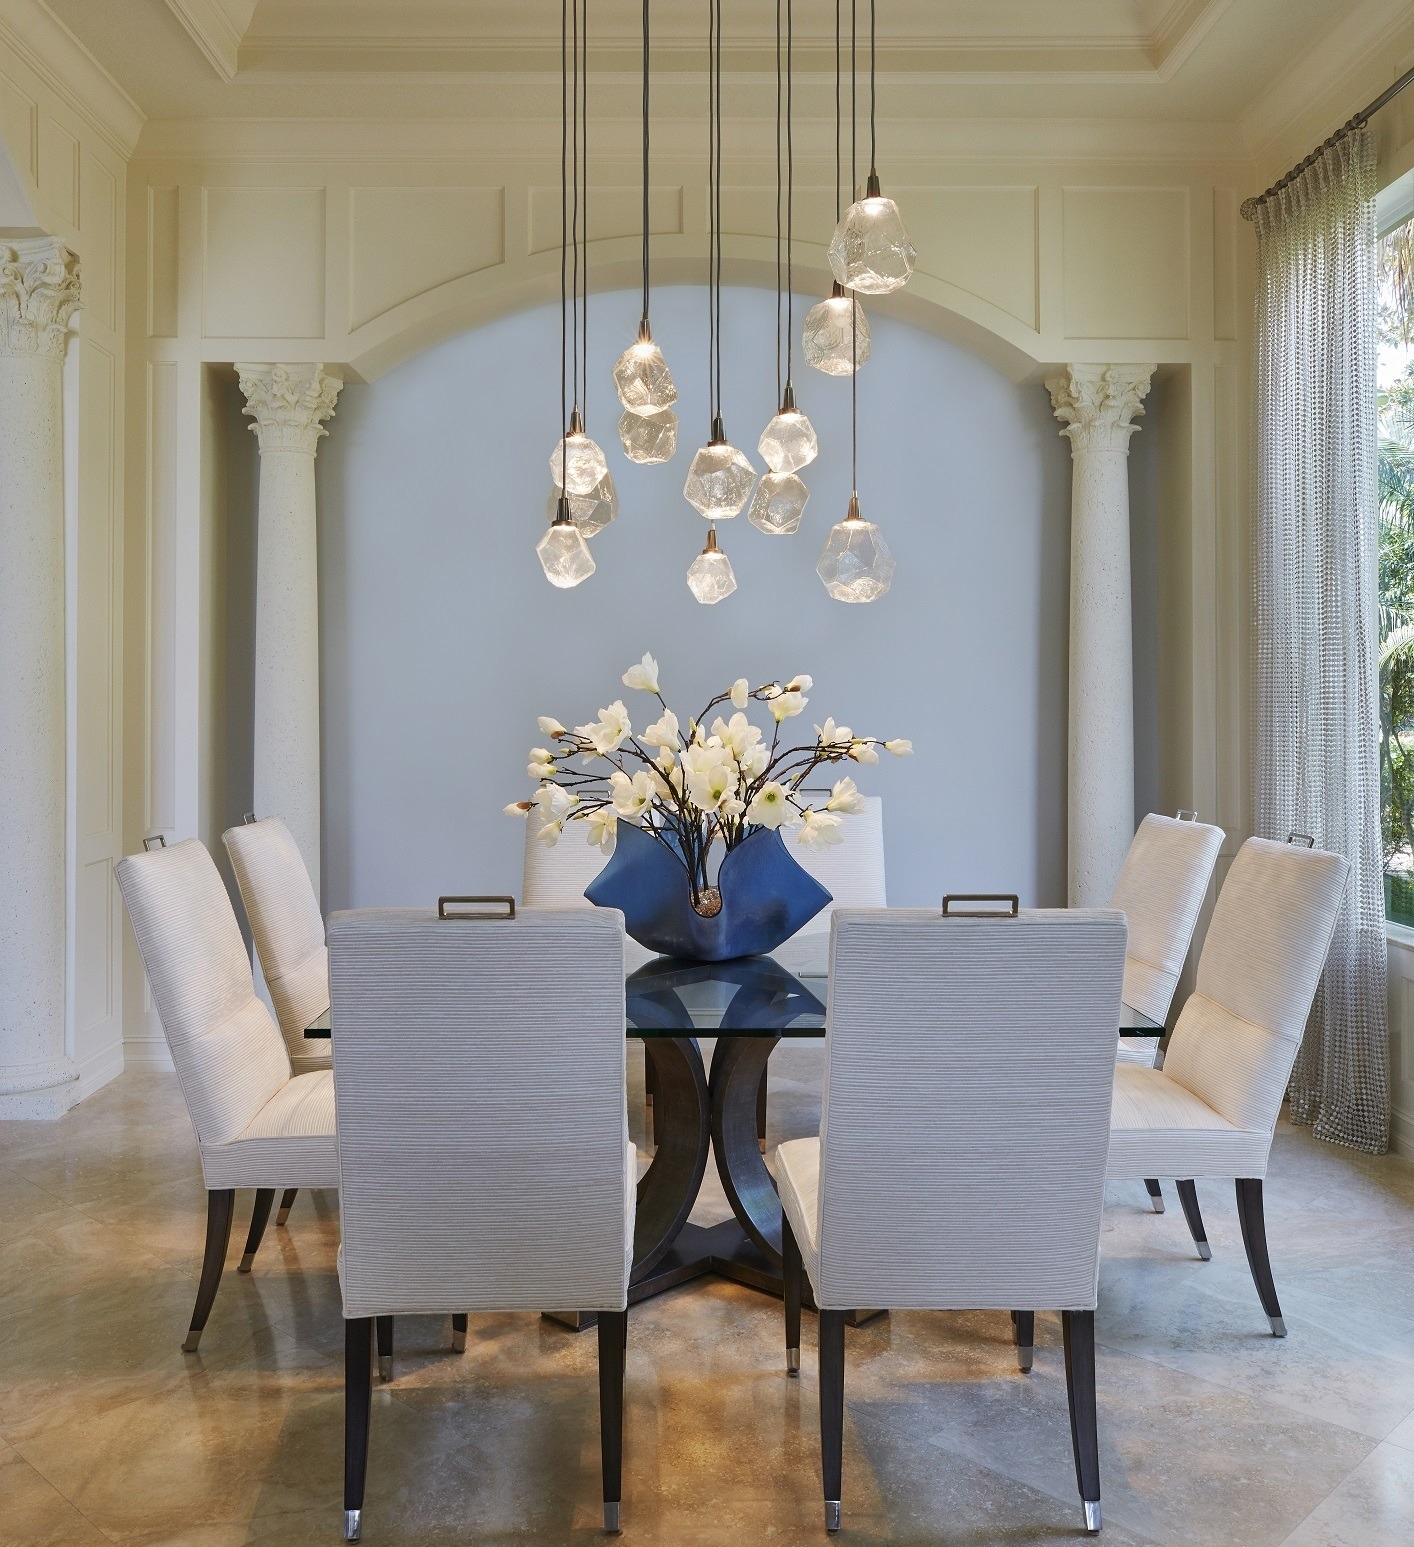 An elegant dining room setting featuring a Hammerton Studio multi-port light fixture of 12 gem-shaped crystal glass light shades, each individually suspended from a singular square base.